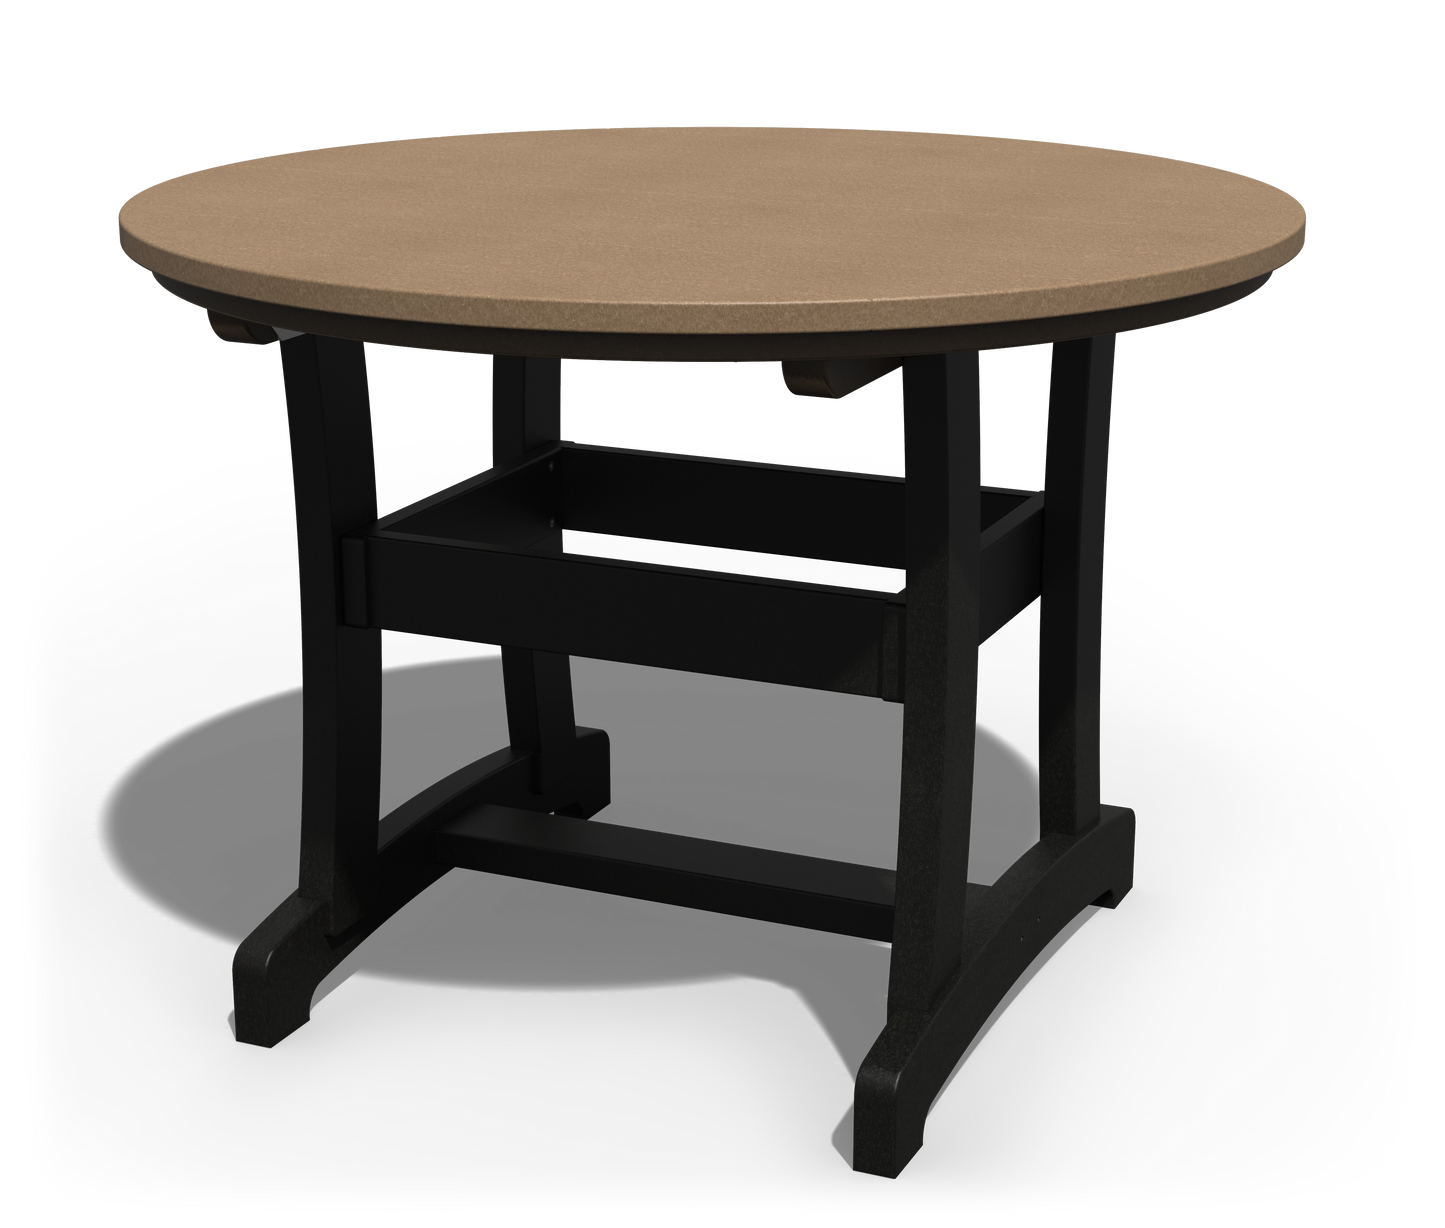 Patiova Recycled Plastic 42" Round Legacy Dining Table - LEAD TIME TO SHIP 3 WEEKS